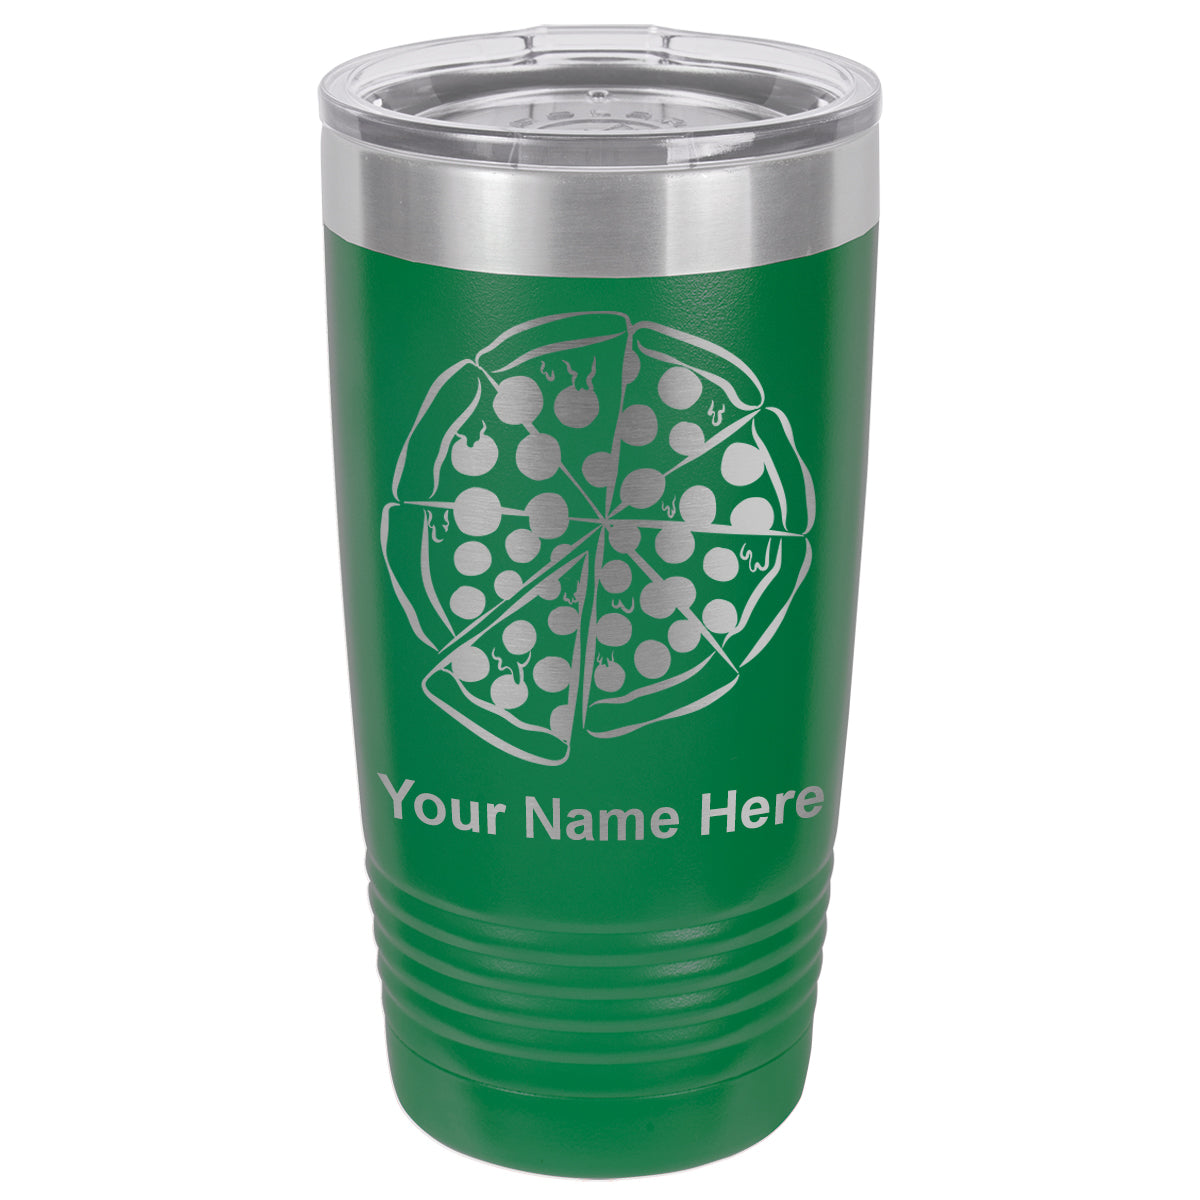 20oz Vacuum Insulated Tumbler Mug, Pizza, Personalized Engraving Included